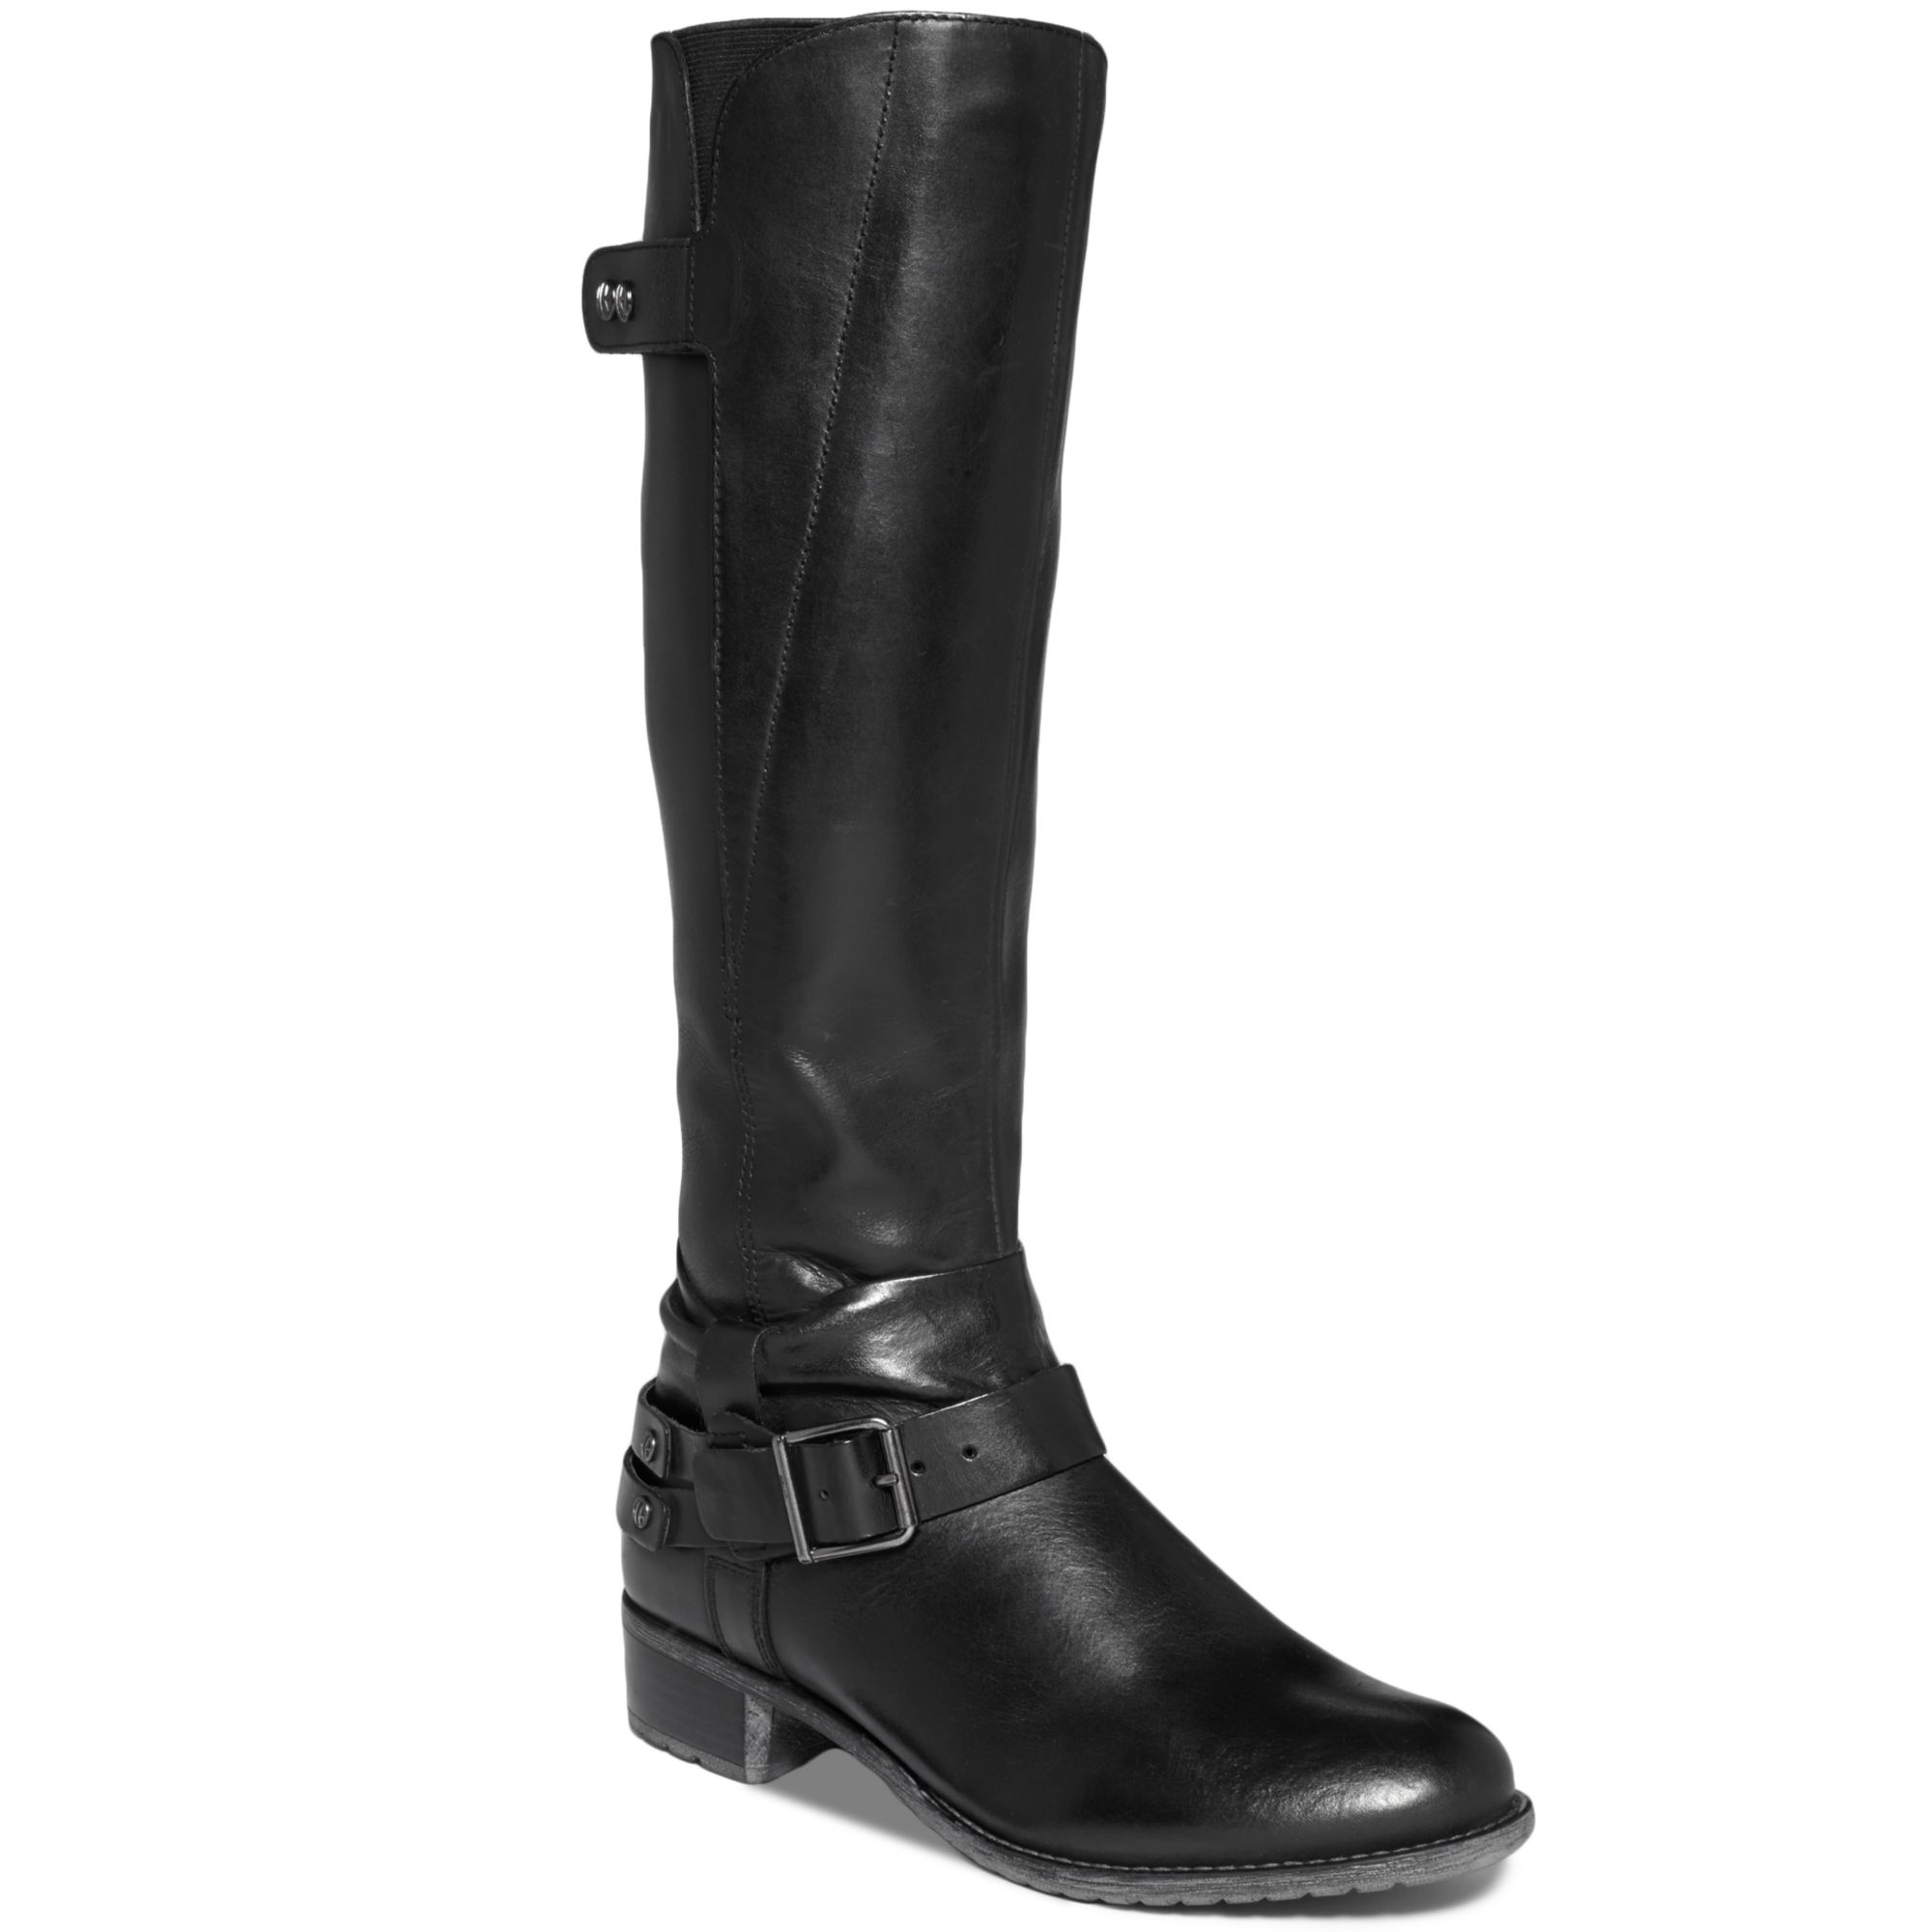 Hush PuppiesÂ® Chamber 14 Wide Calf Boots in Black | Lyst